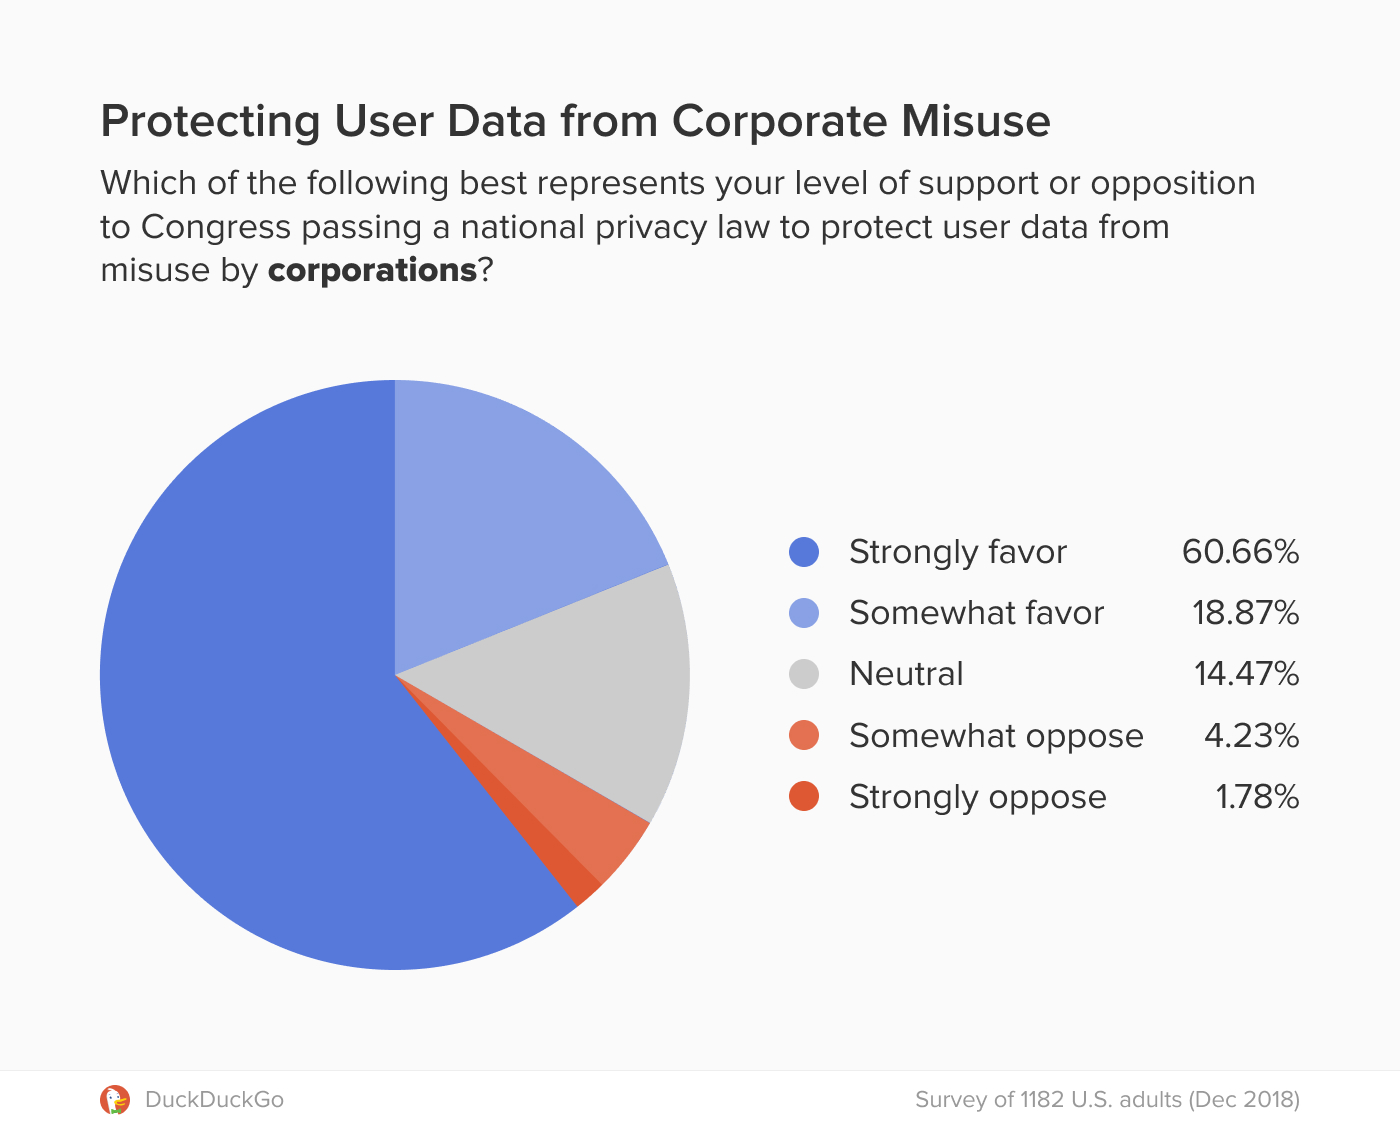 Chart showing support for a privacy law to protect from data misuse by corporations.